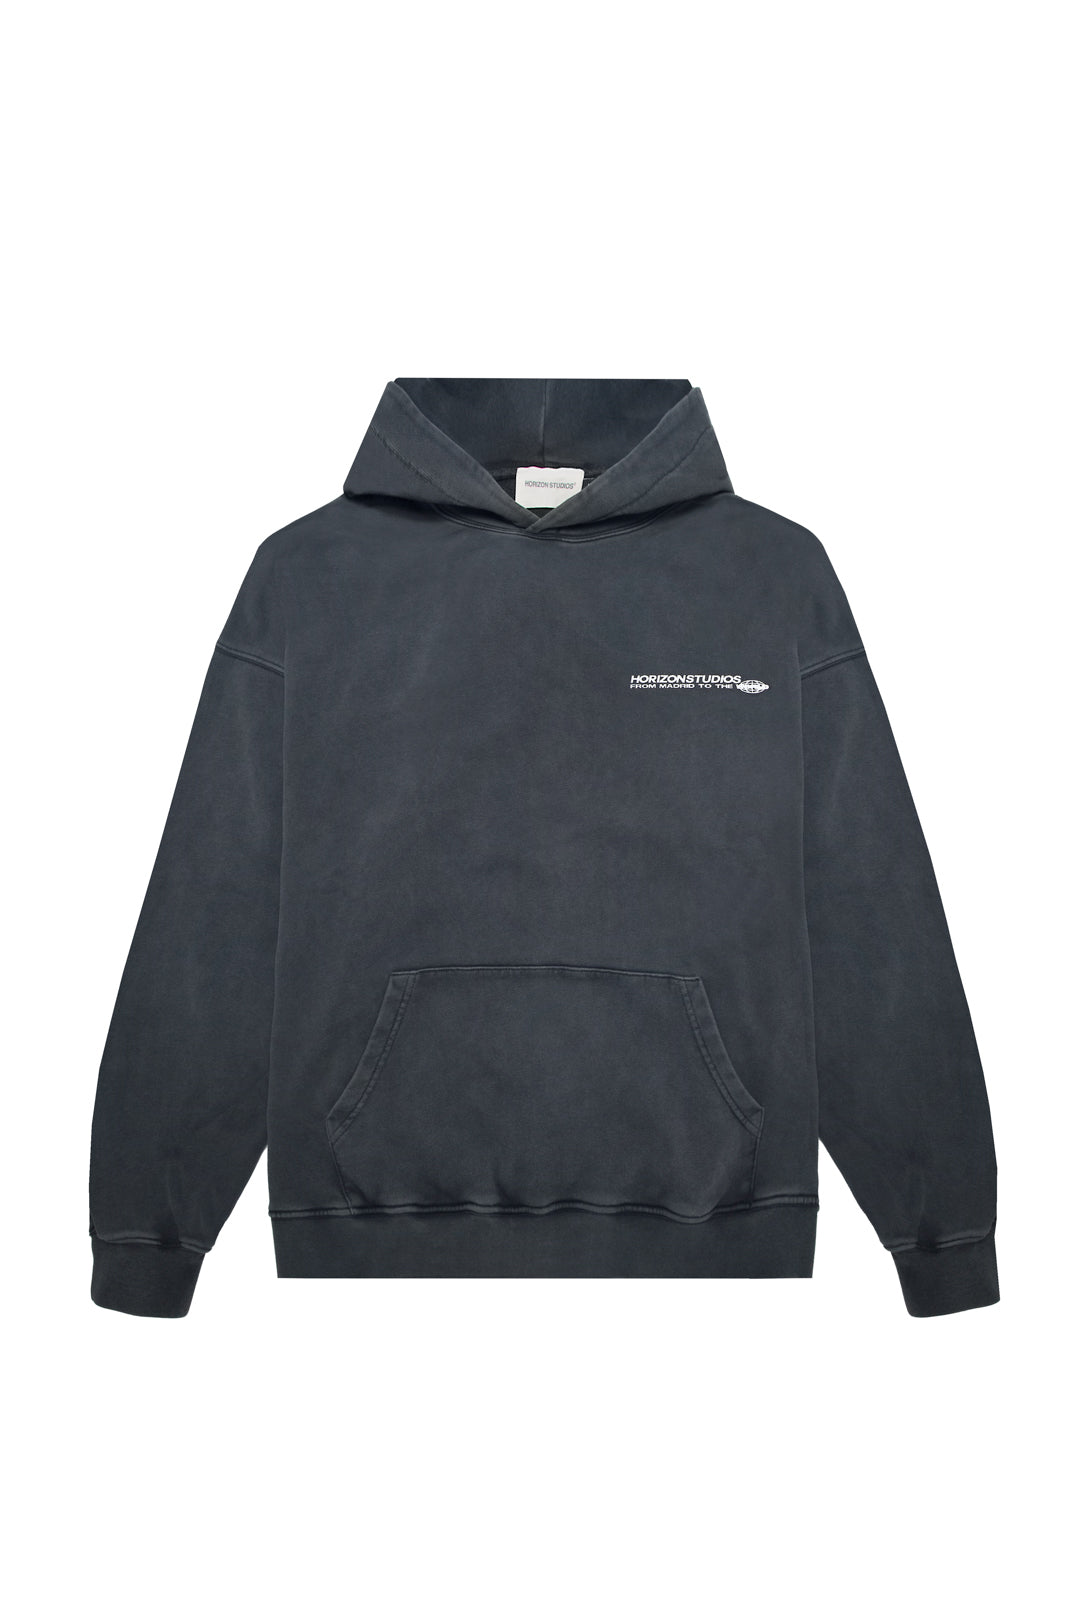 Anthracite Grey “To The World” Hoodie